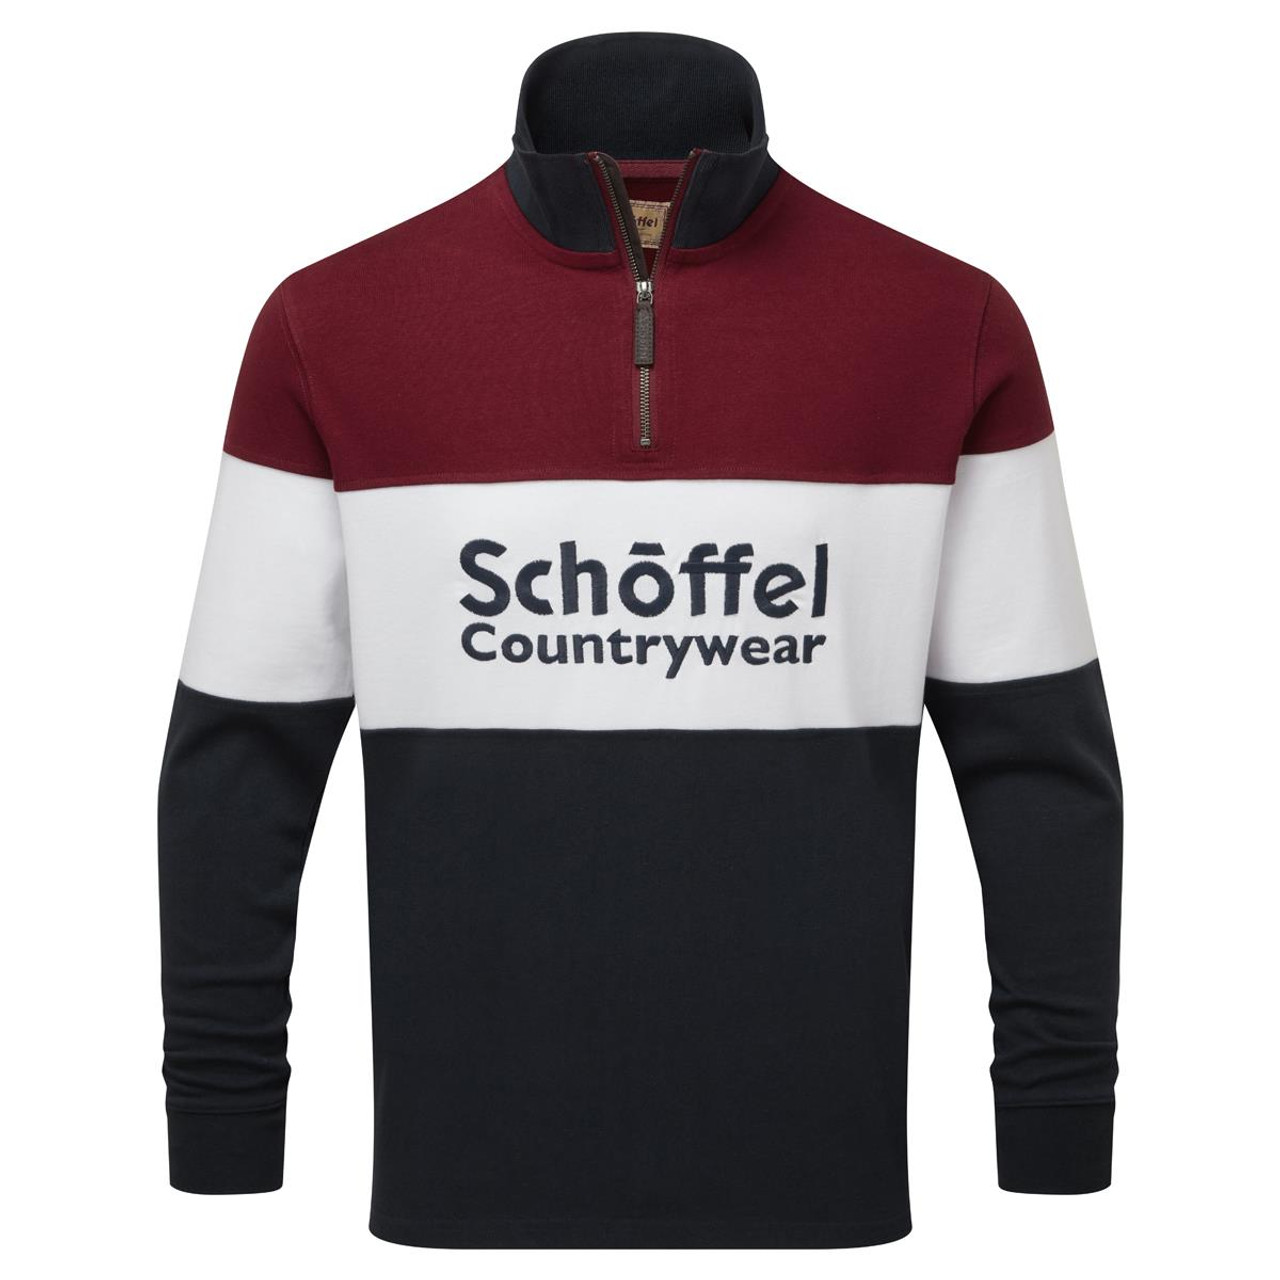 What features does the Schoffel Exeter Heritage 1/4 Zip Unisex jumper have?